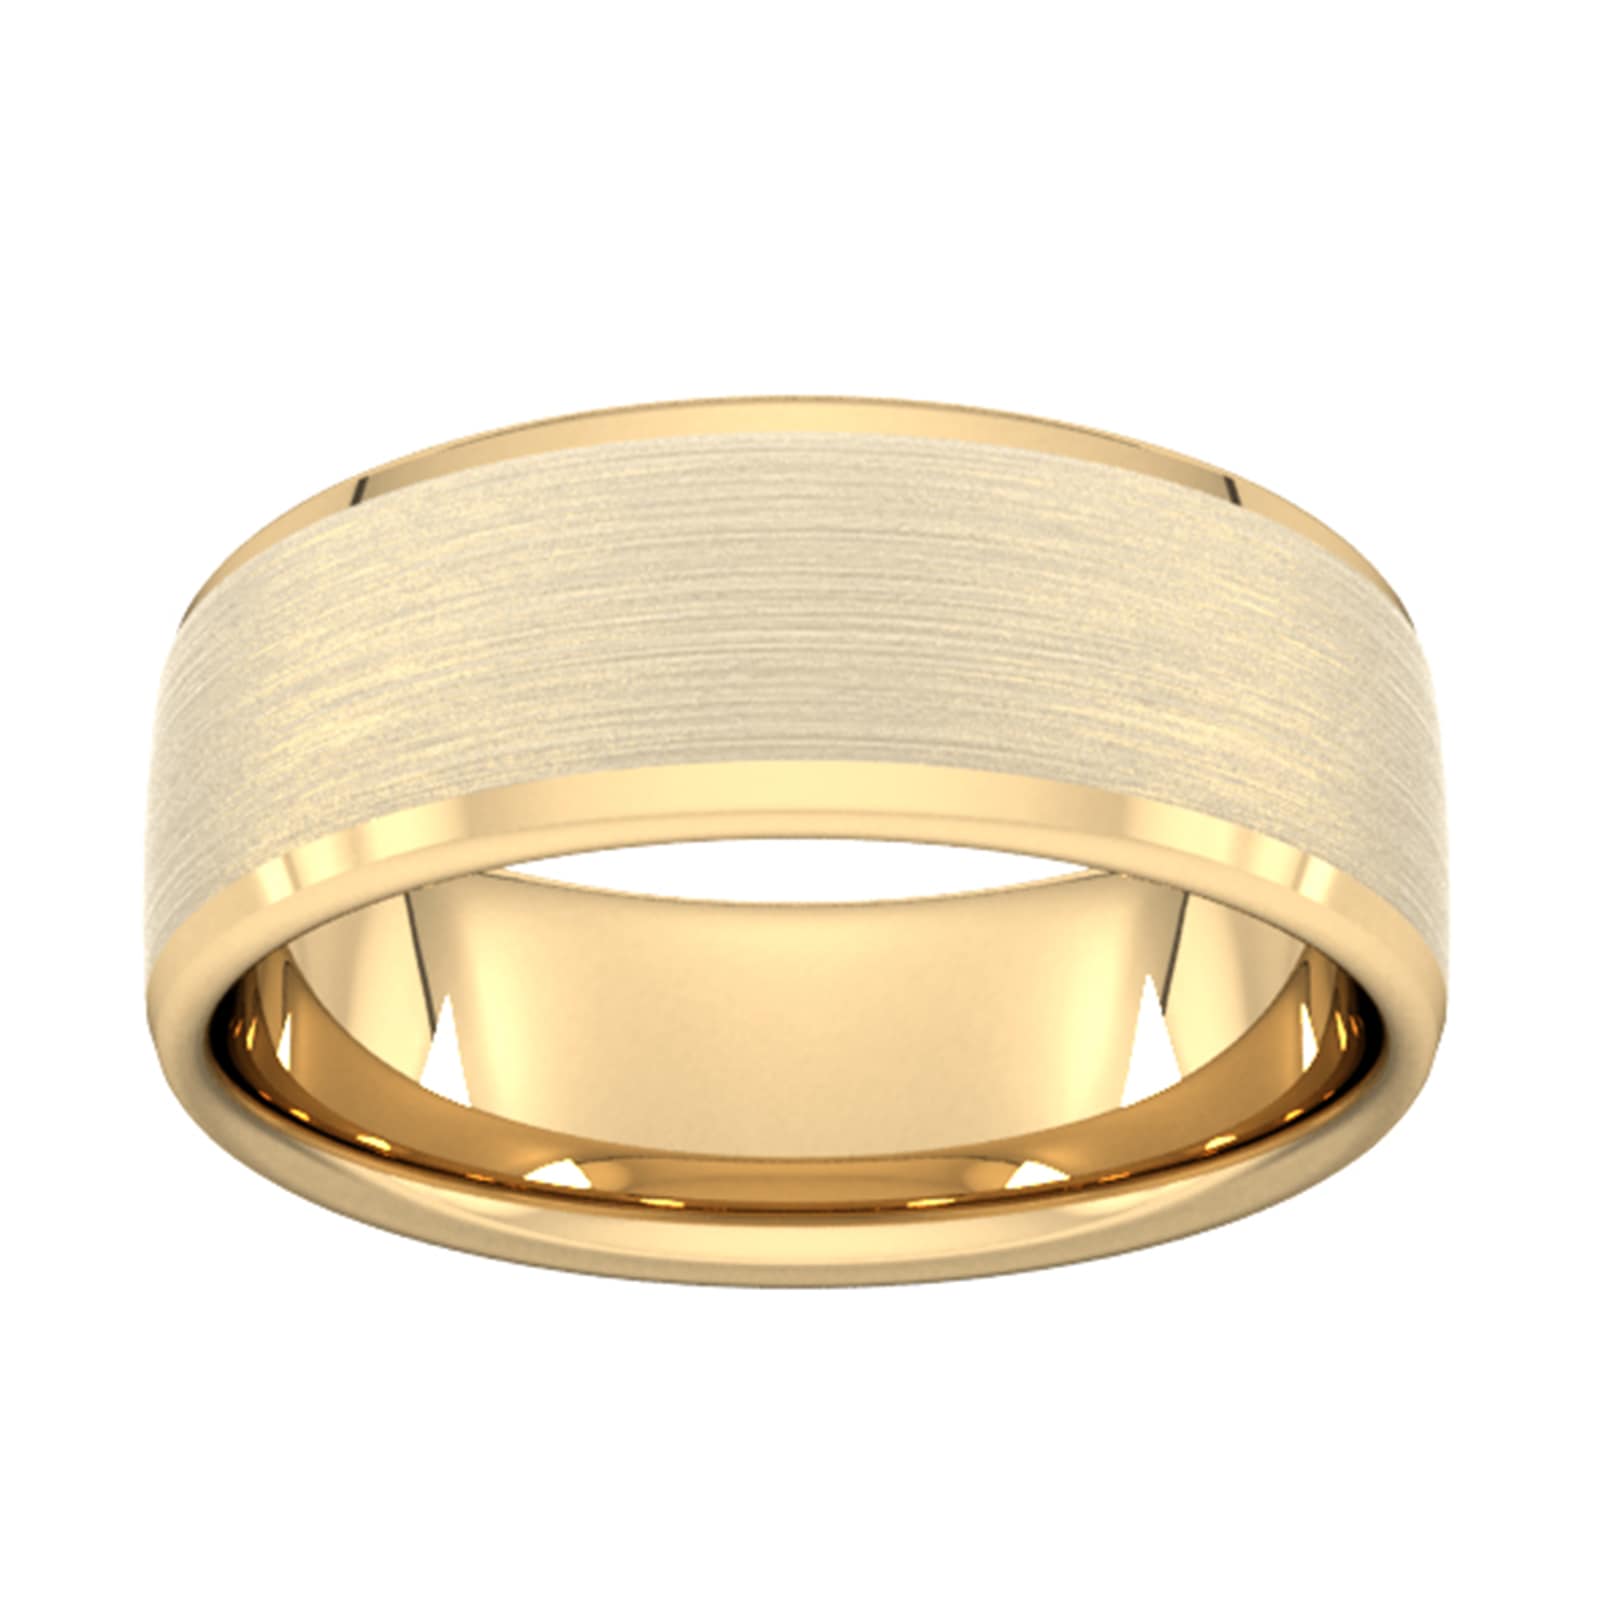 8mm Slight Court Extra Heavy Polished Chamfered Edges With Matt Centre Wedding Ring In 18 Carat Yellow Gold - Ring Size K